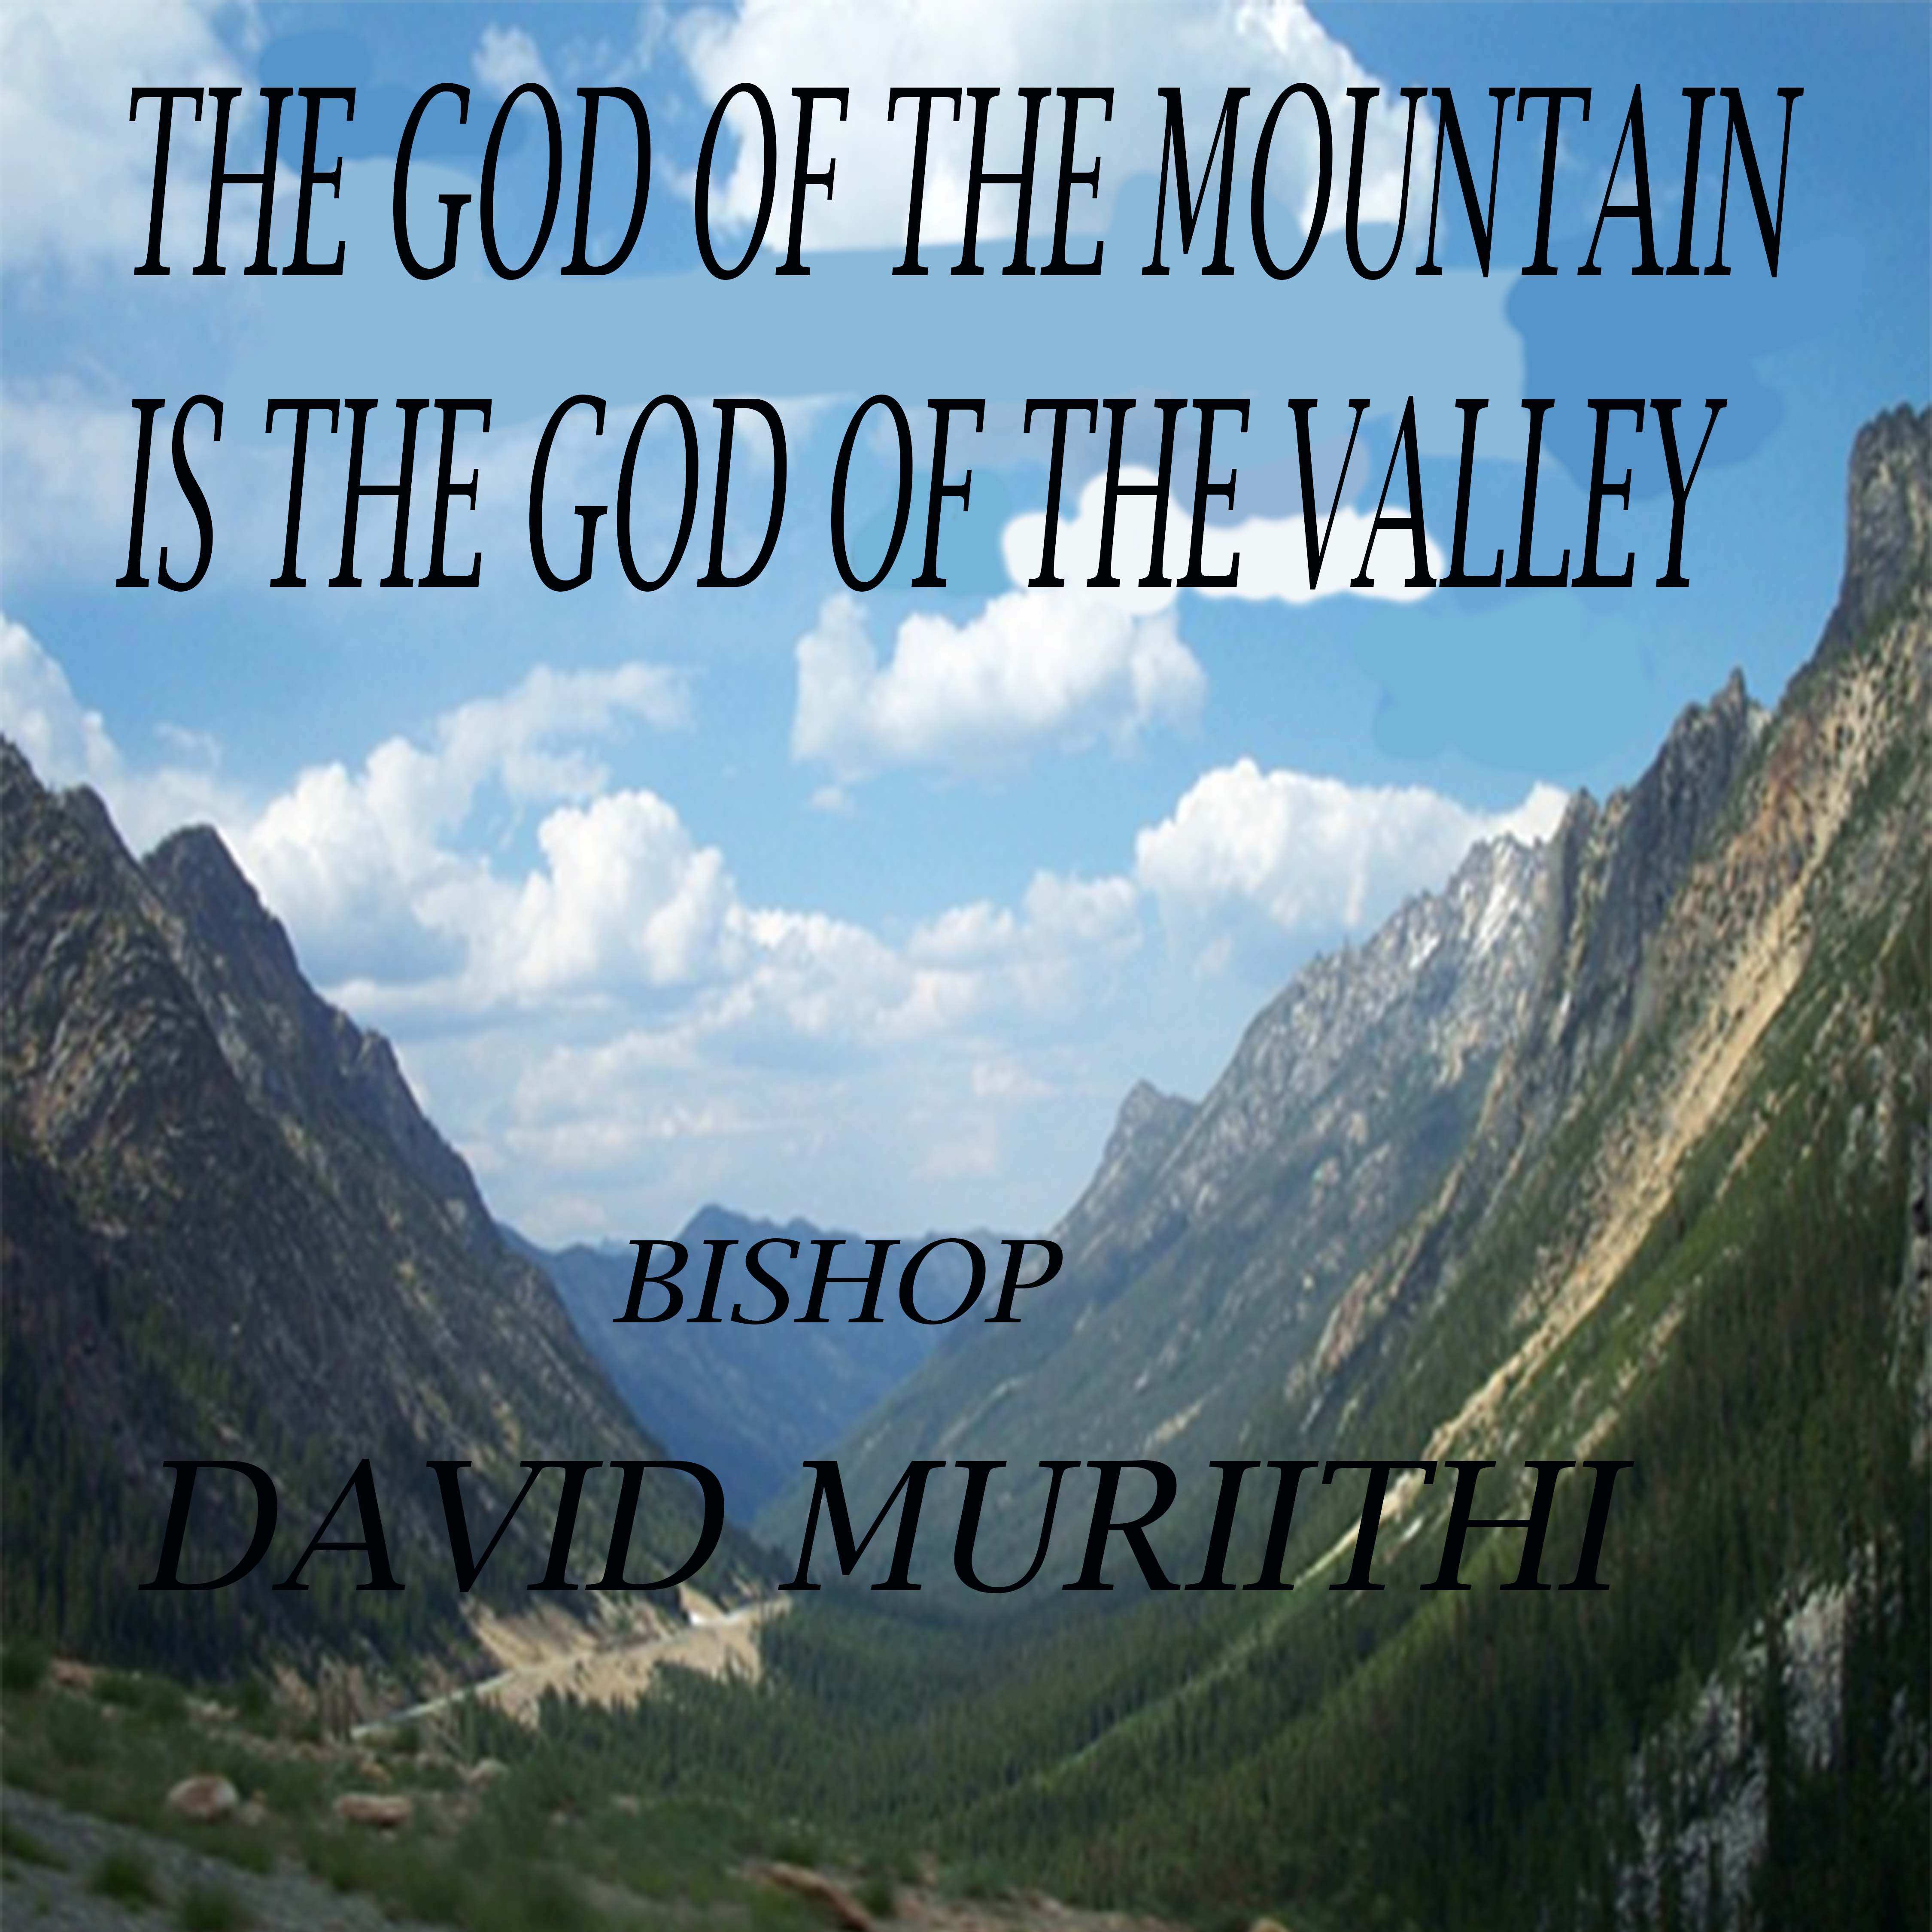 THE GOD OF THE MOUNTAIN IS THE GOD OF THE VALLEY